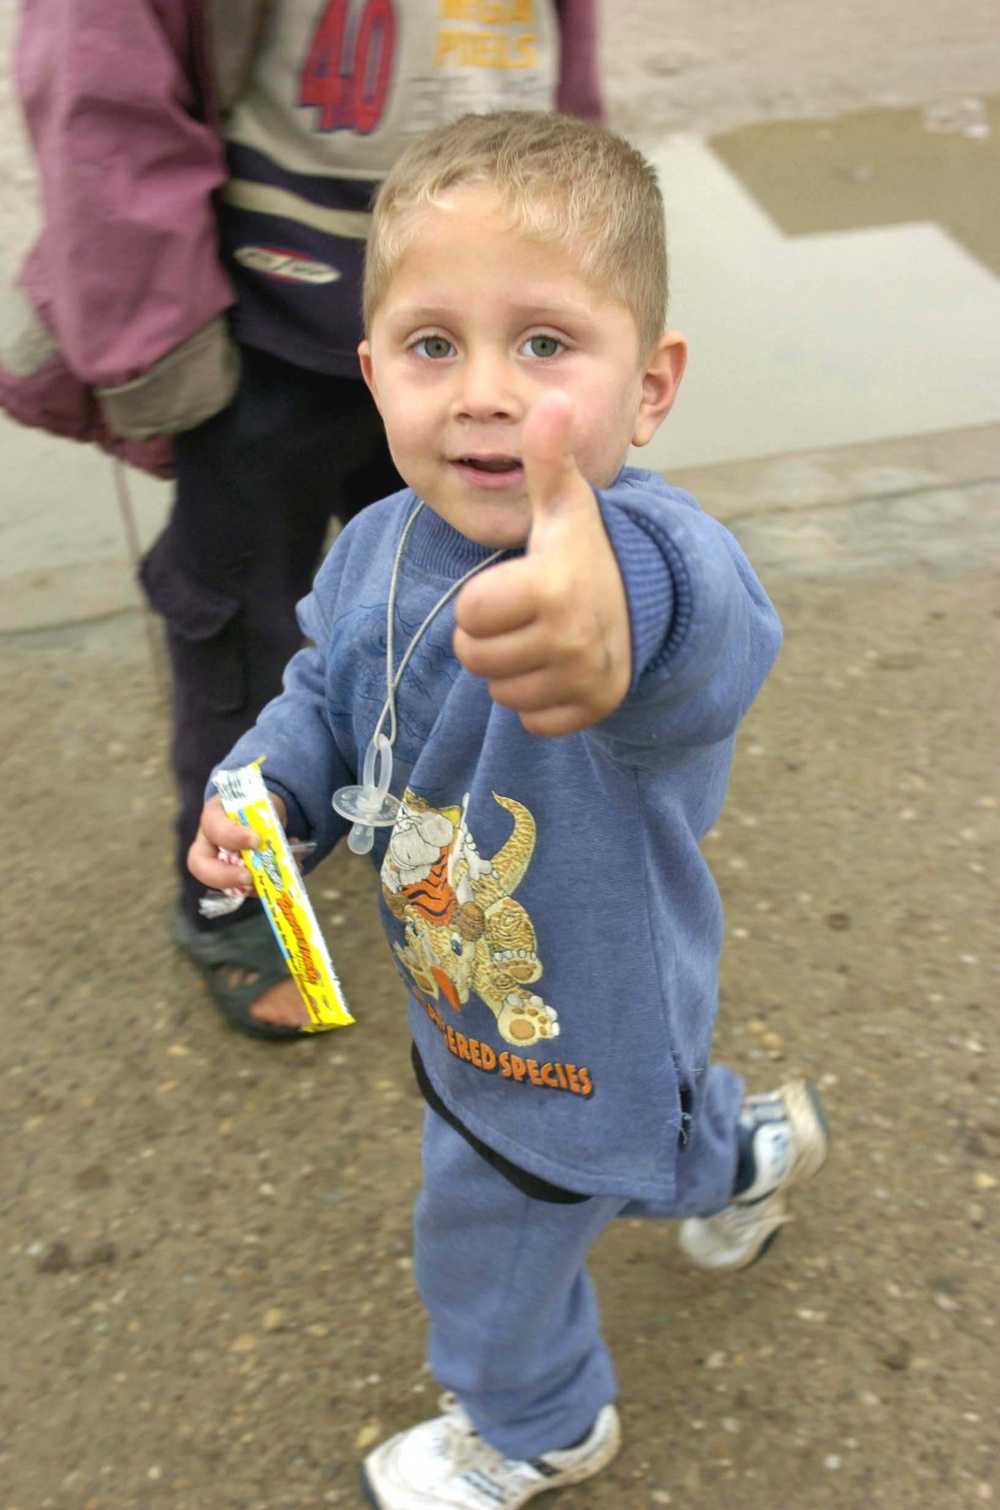 An Iraqi Child gives a &quot;thumbs-up&quot;